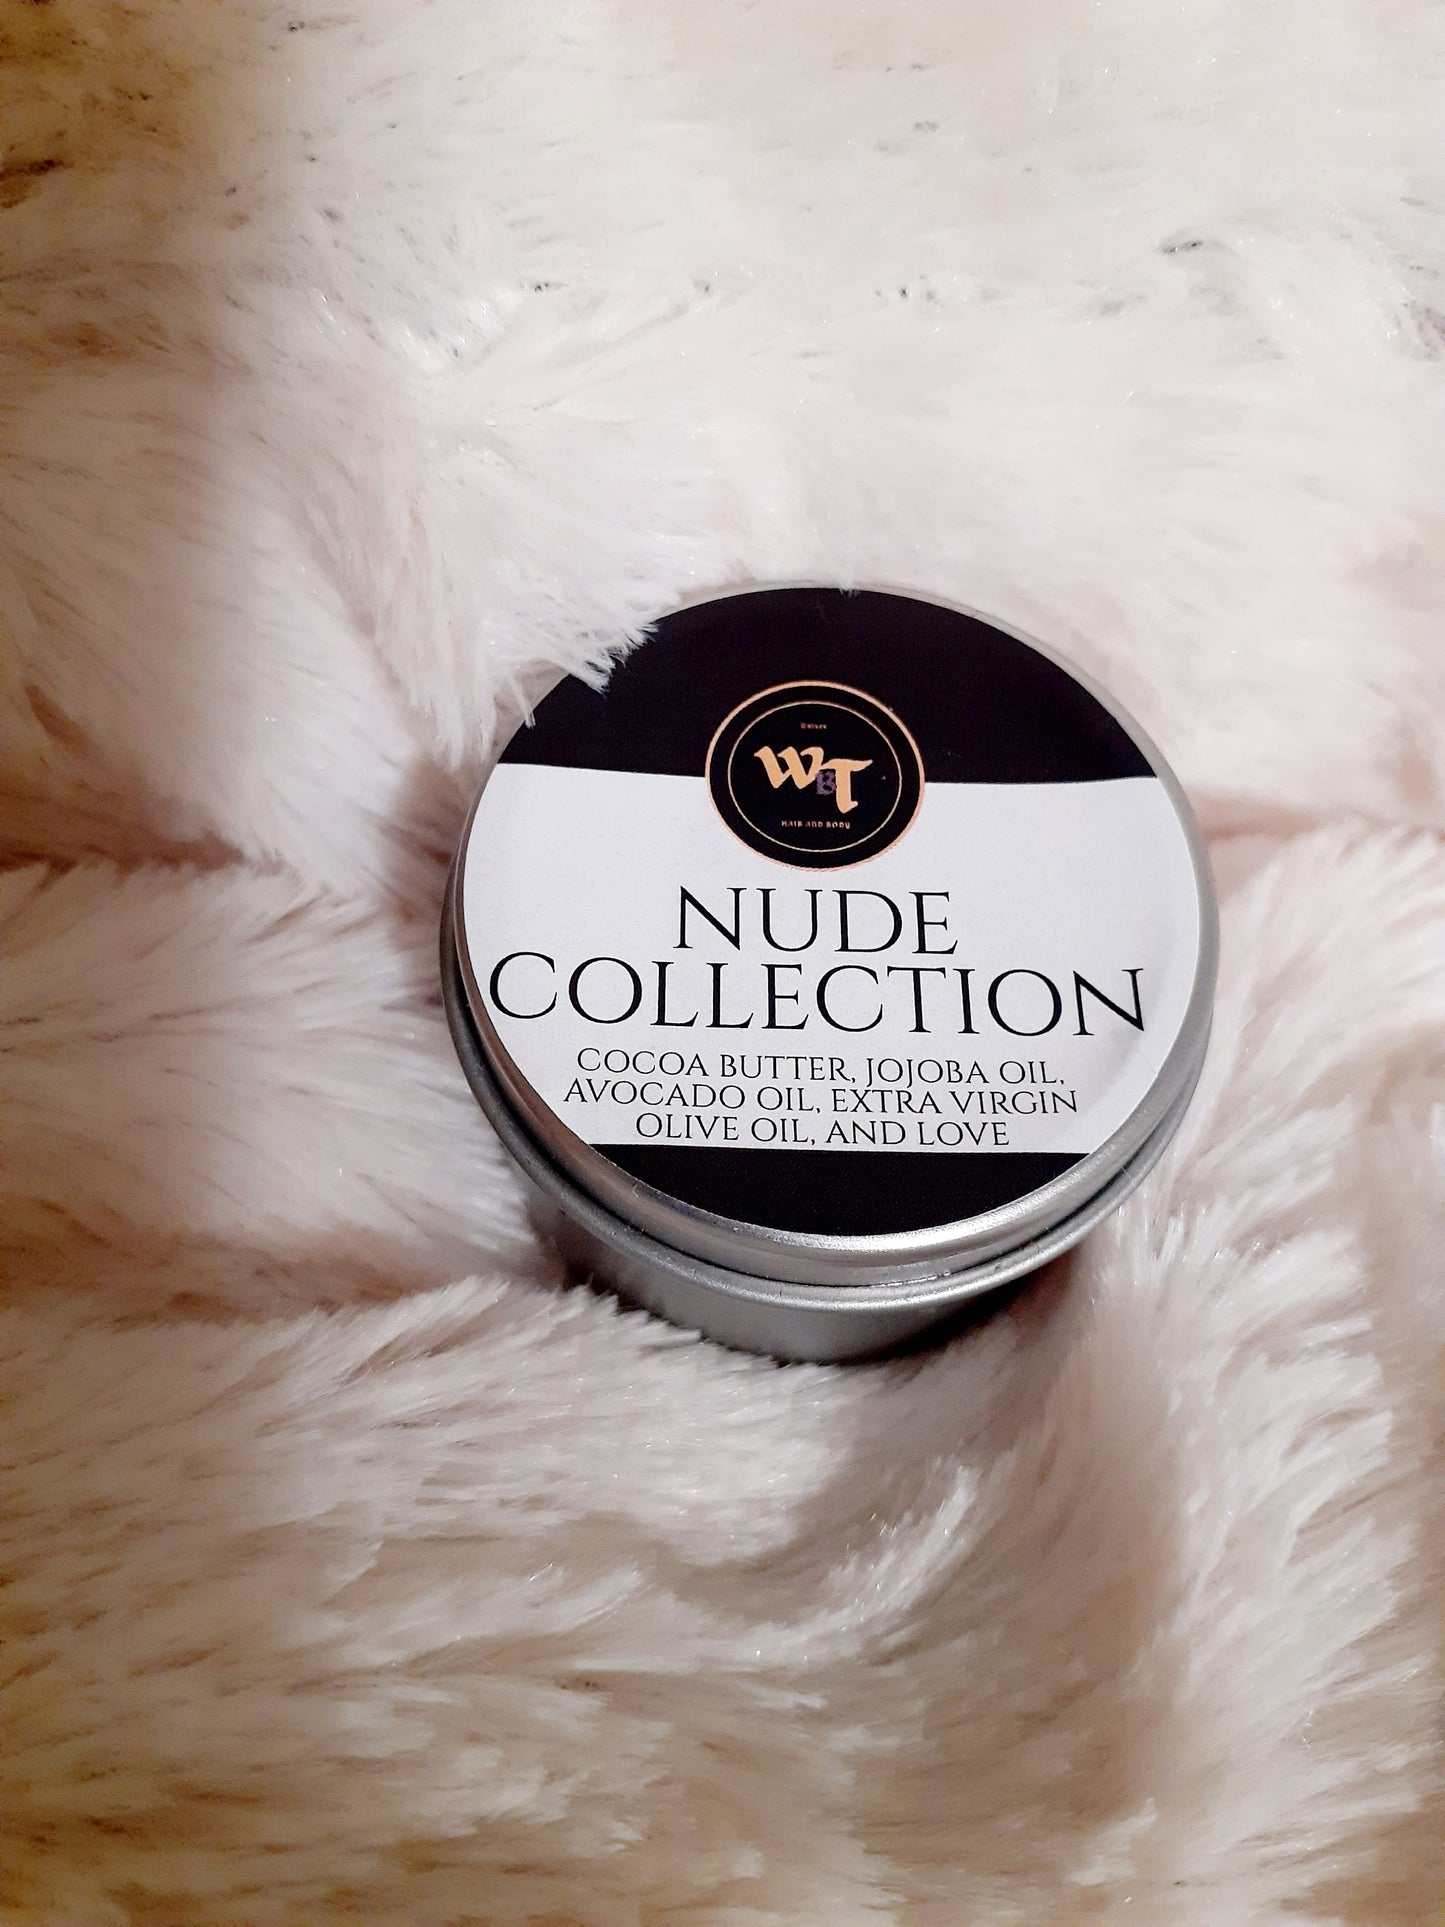 Nude Collection SAVE $17.00